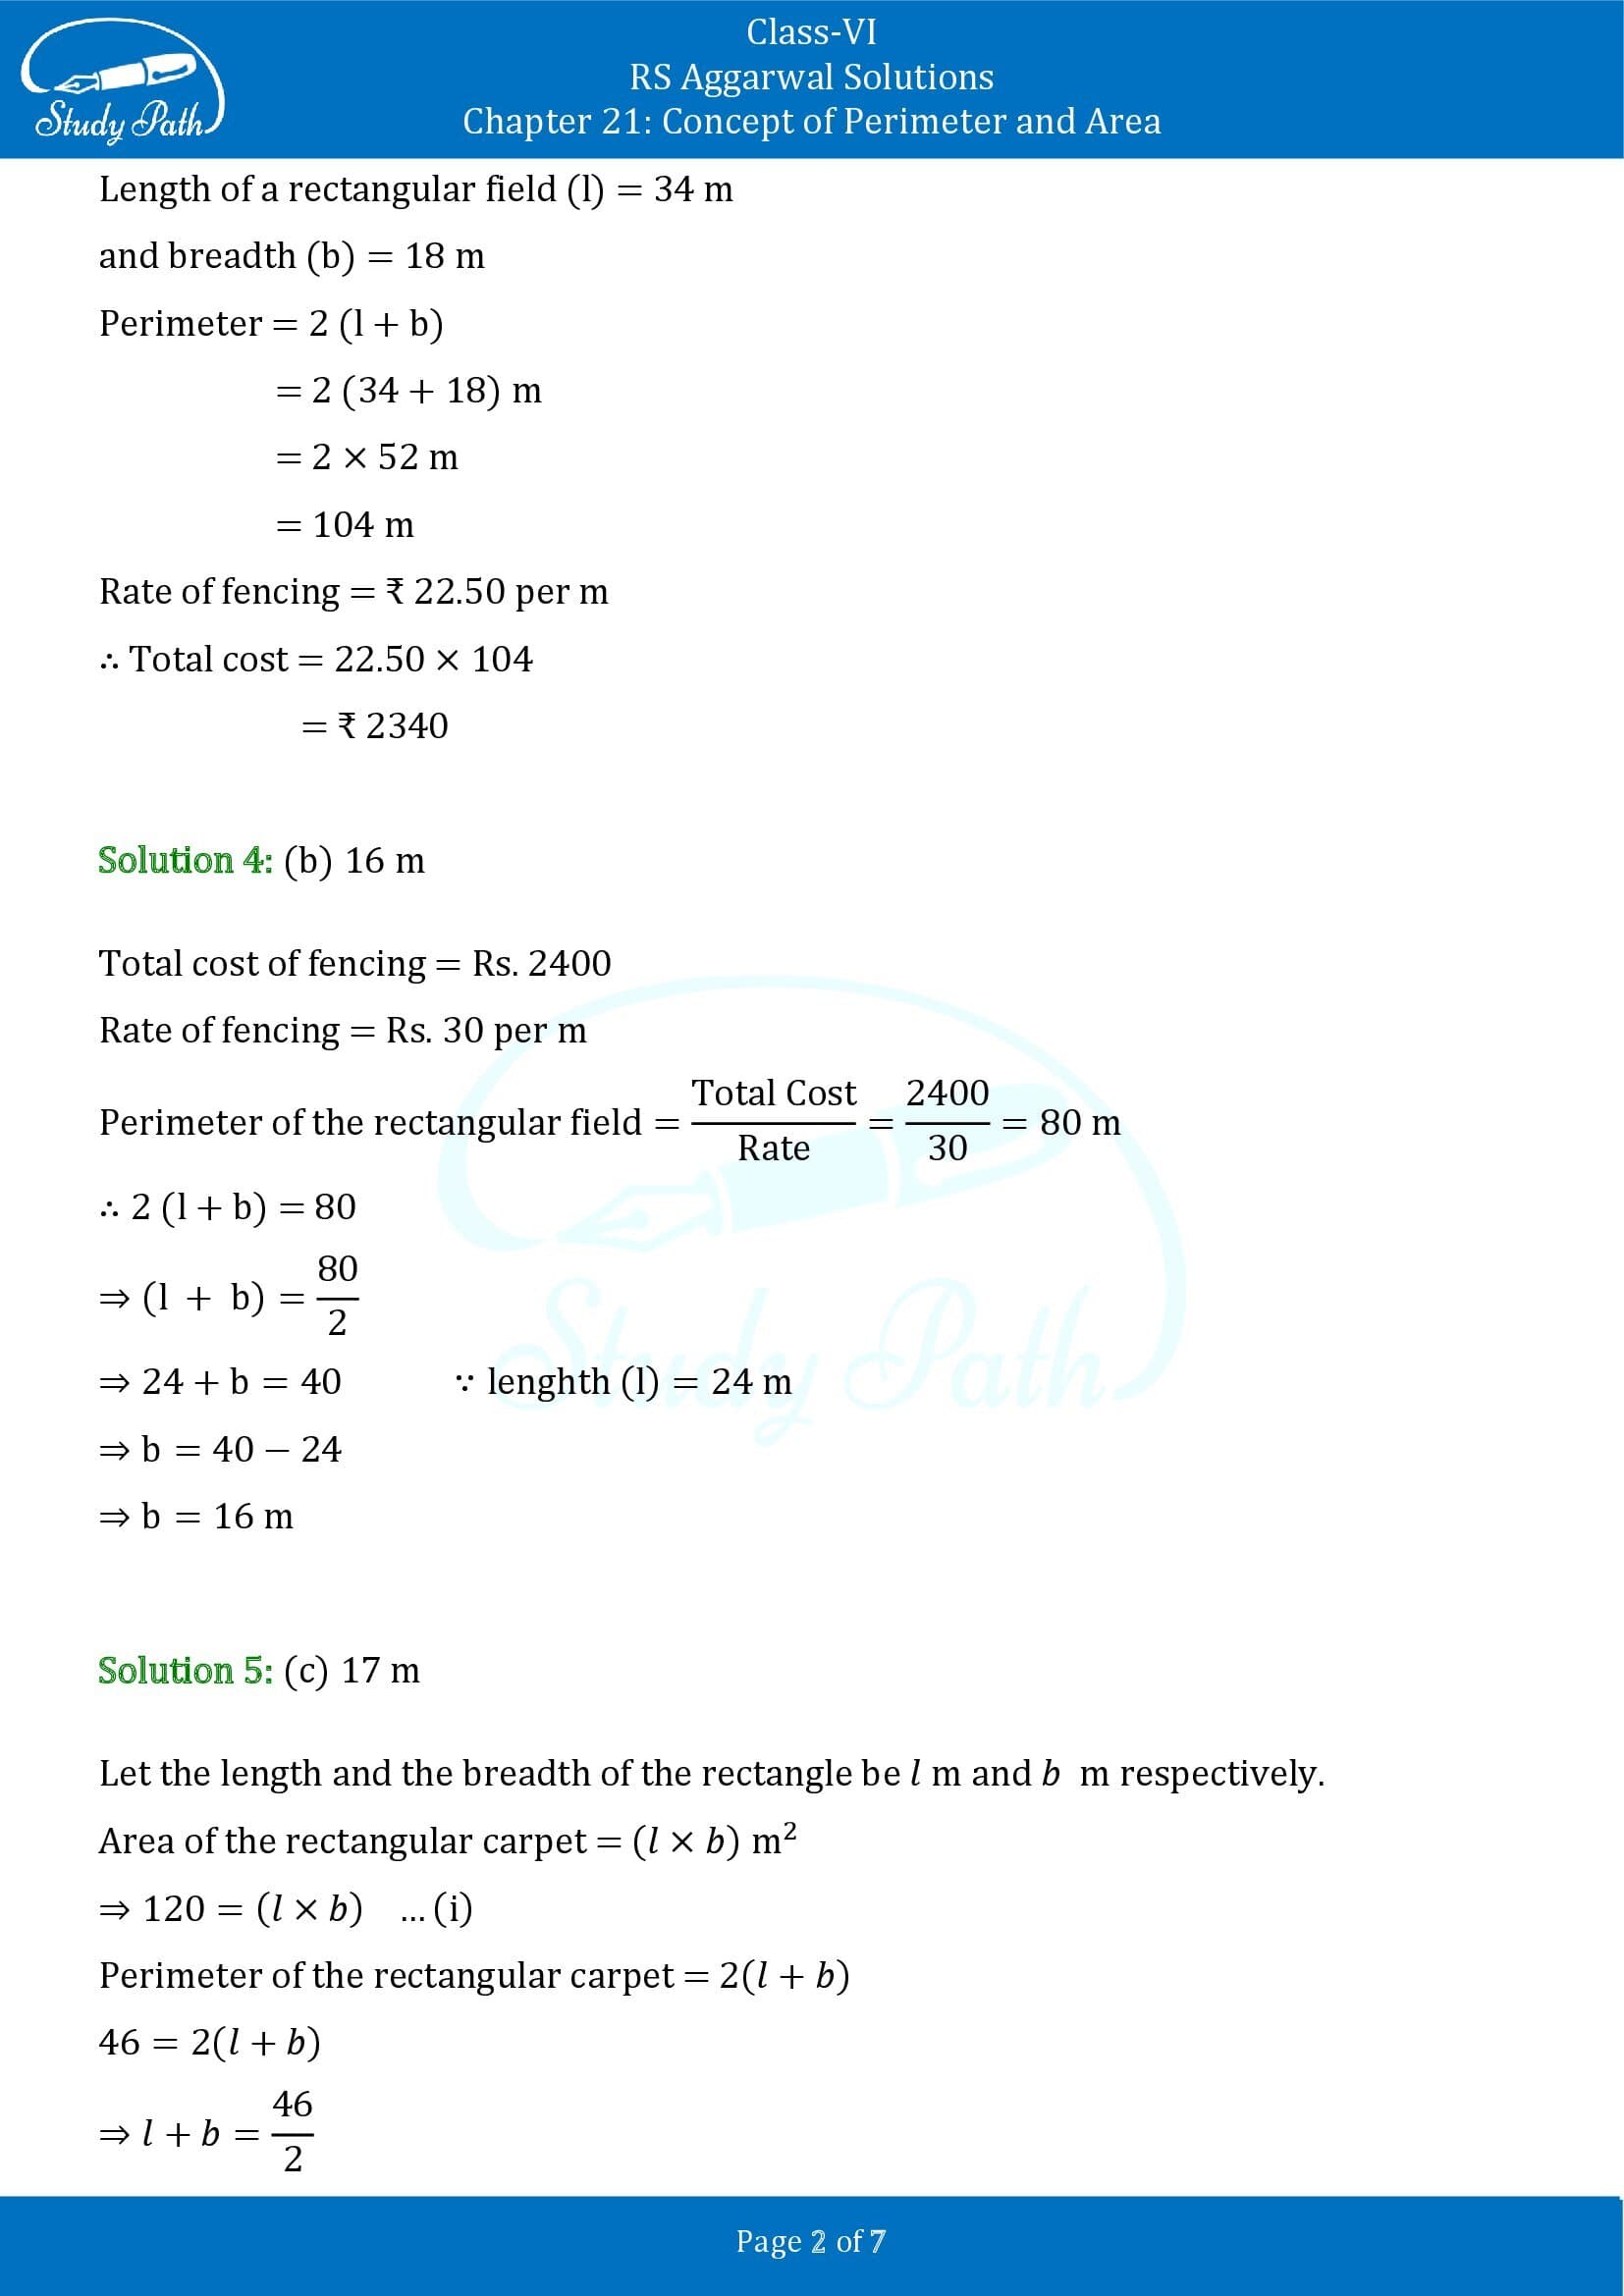 RS Aggarwal Solutions Class 6 Chapter 21 Concept of Perimeter and Area Exercise 21E MCQ 002